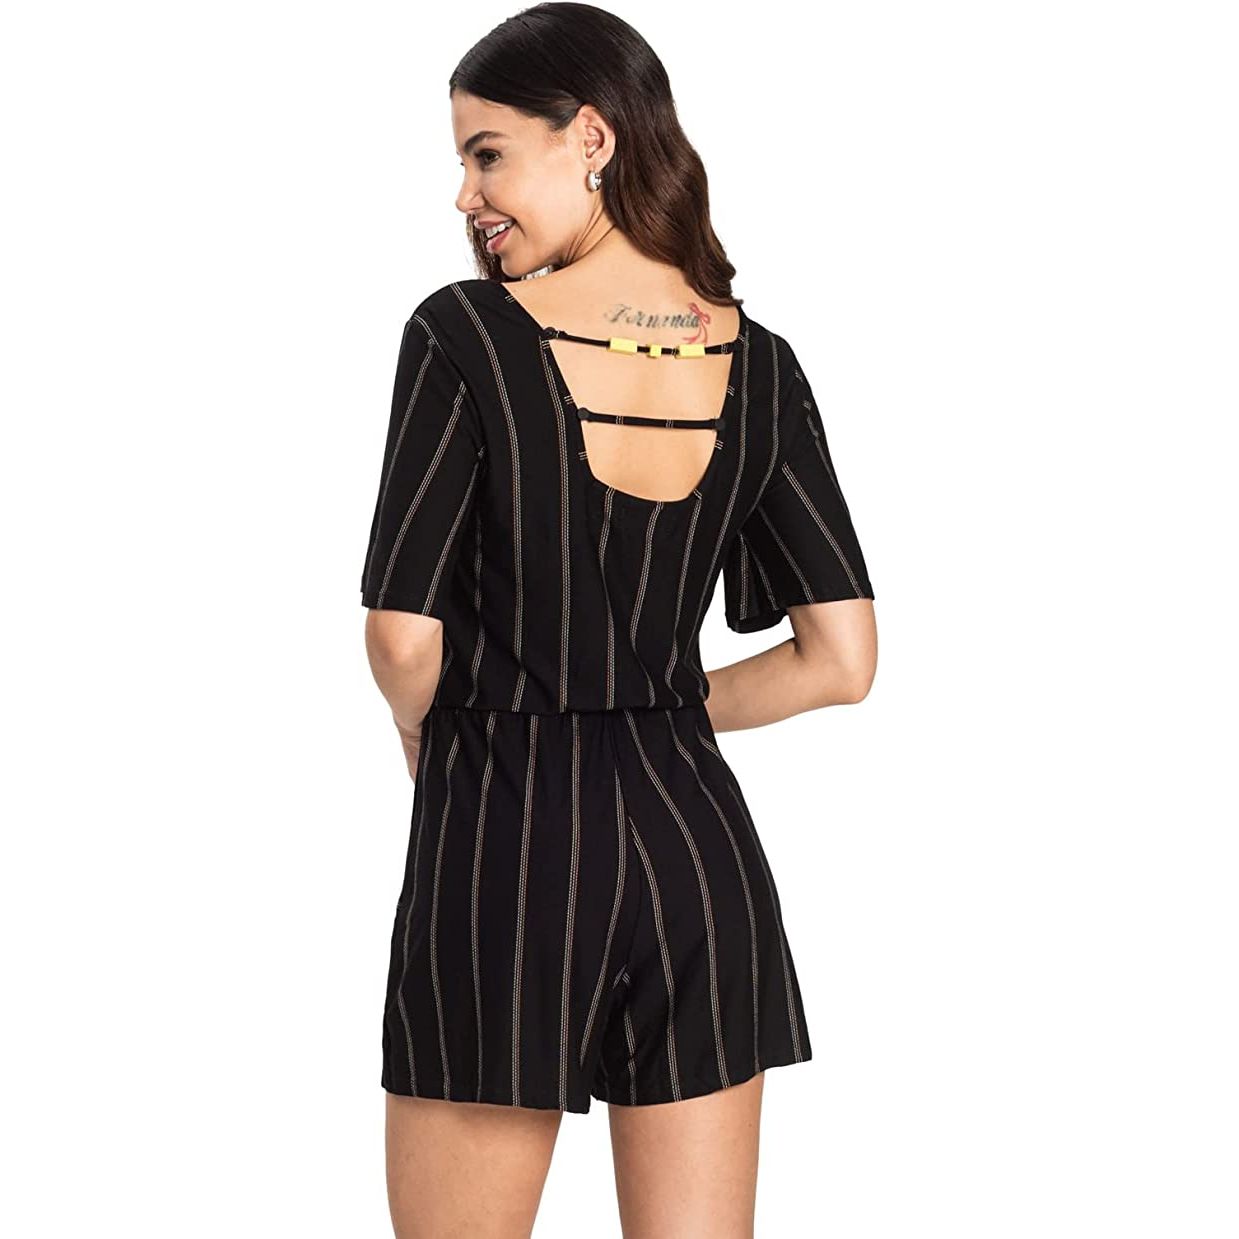 Endless Collection Women's Elasticated Waist Romper - Stylish and Versatile Summer Fashion